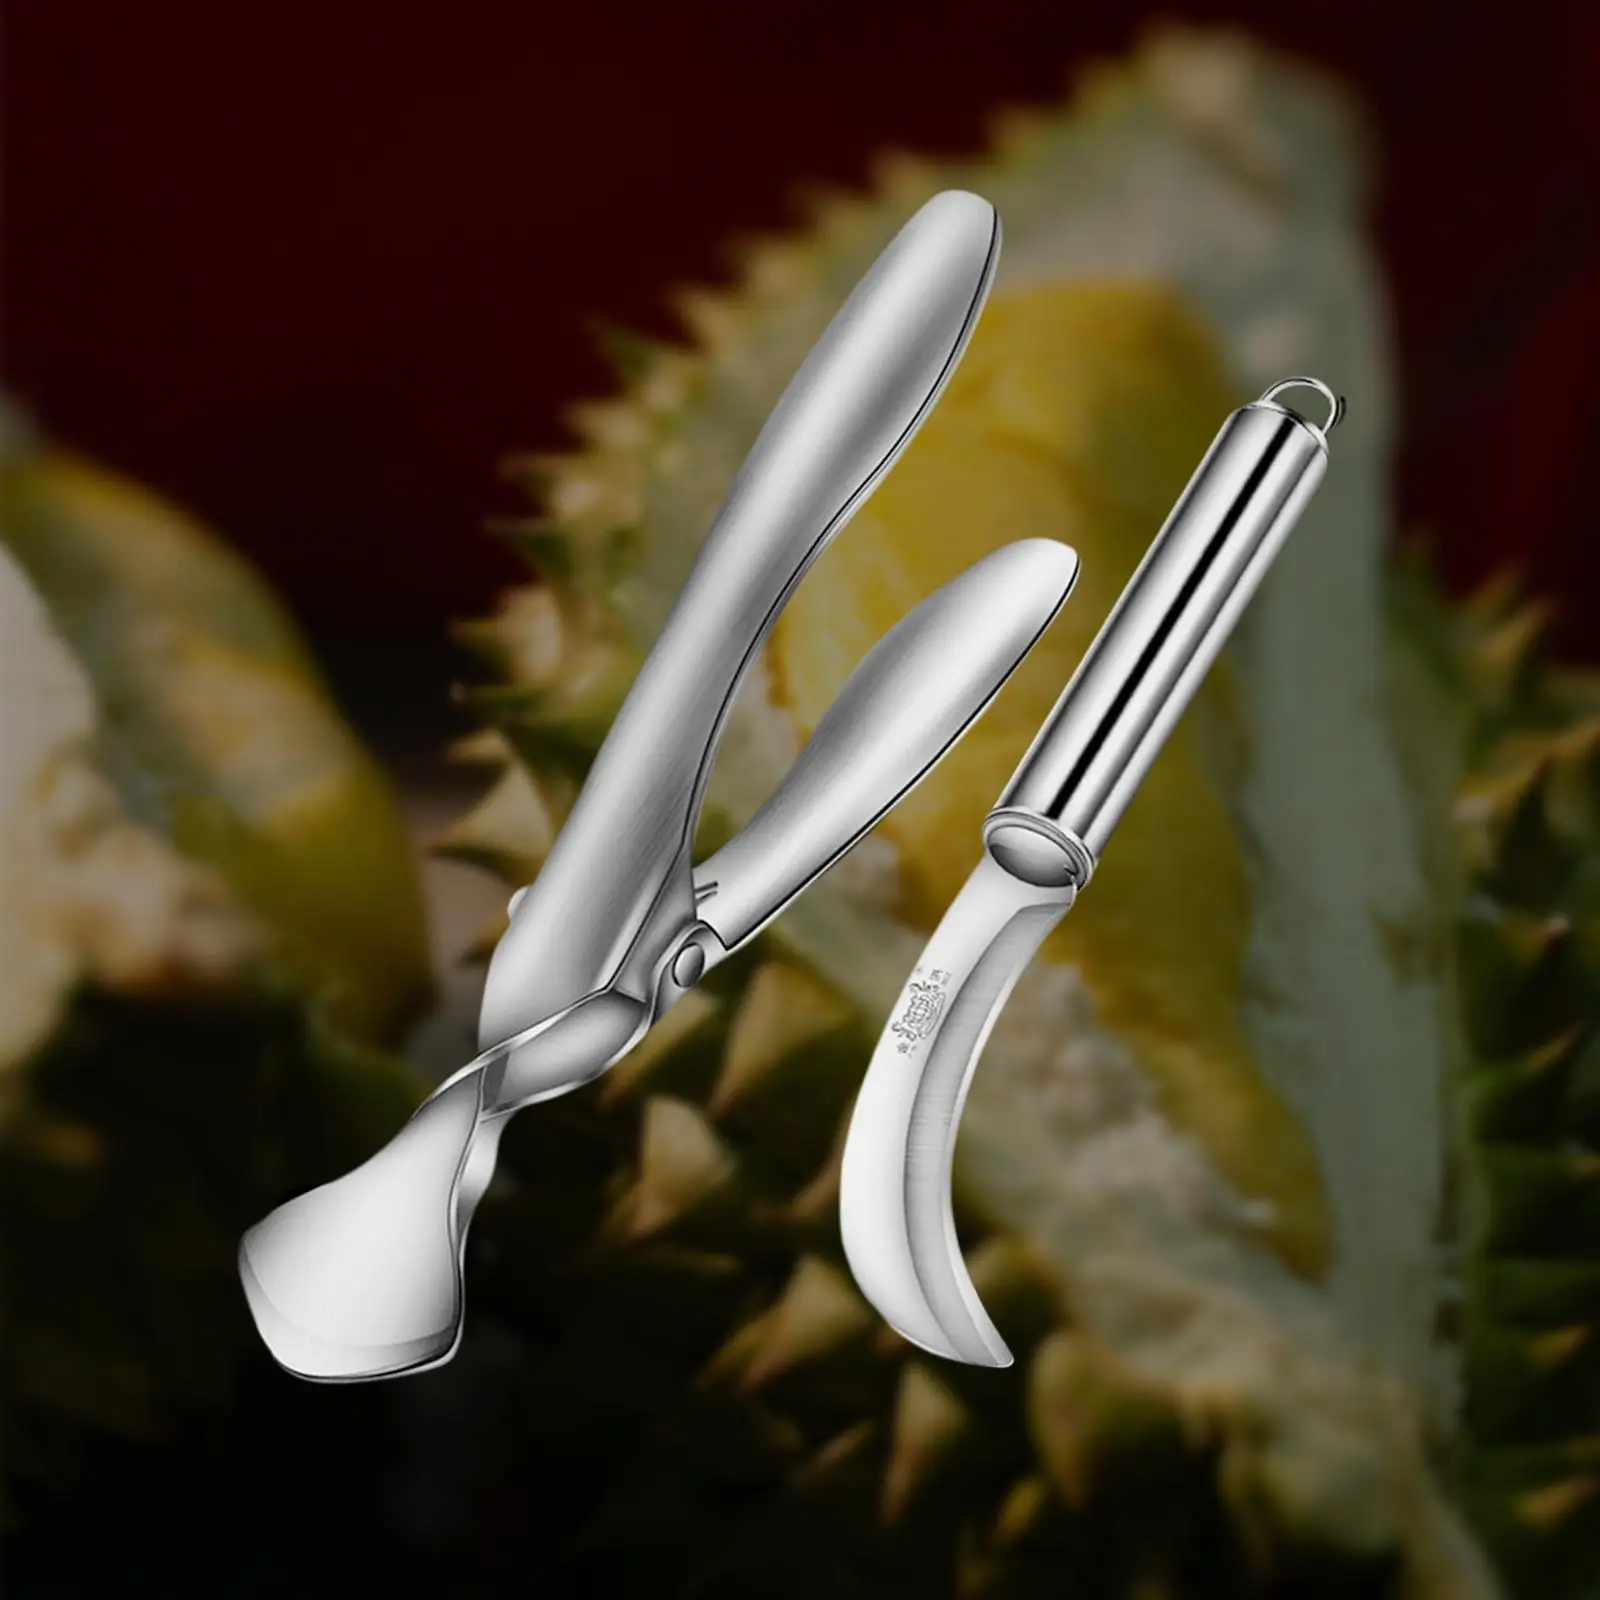 Fruit Durian Shell Opener Clip Manual Save Labors Durable Peeling Smooth Durian